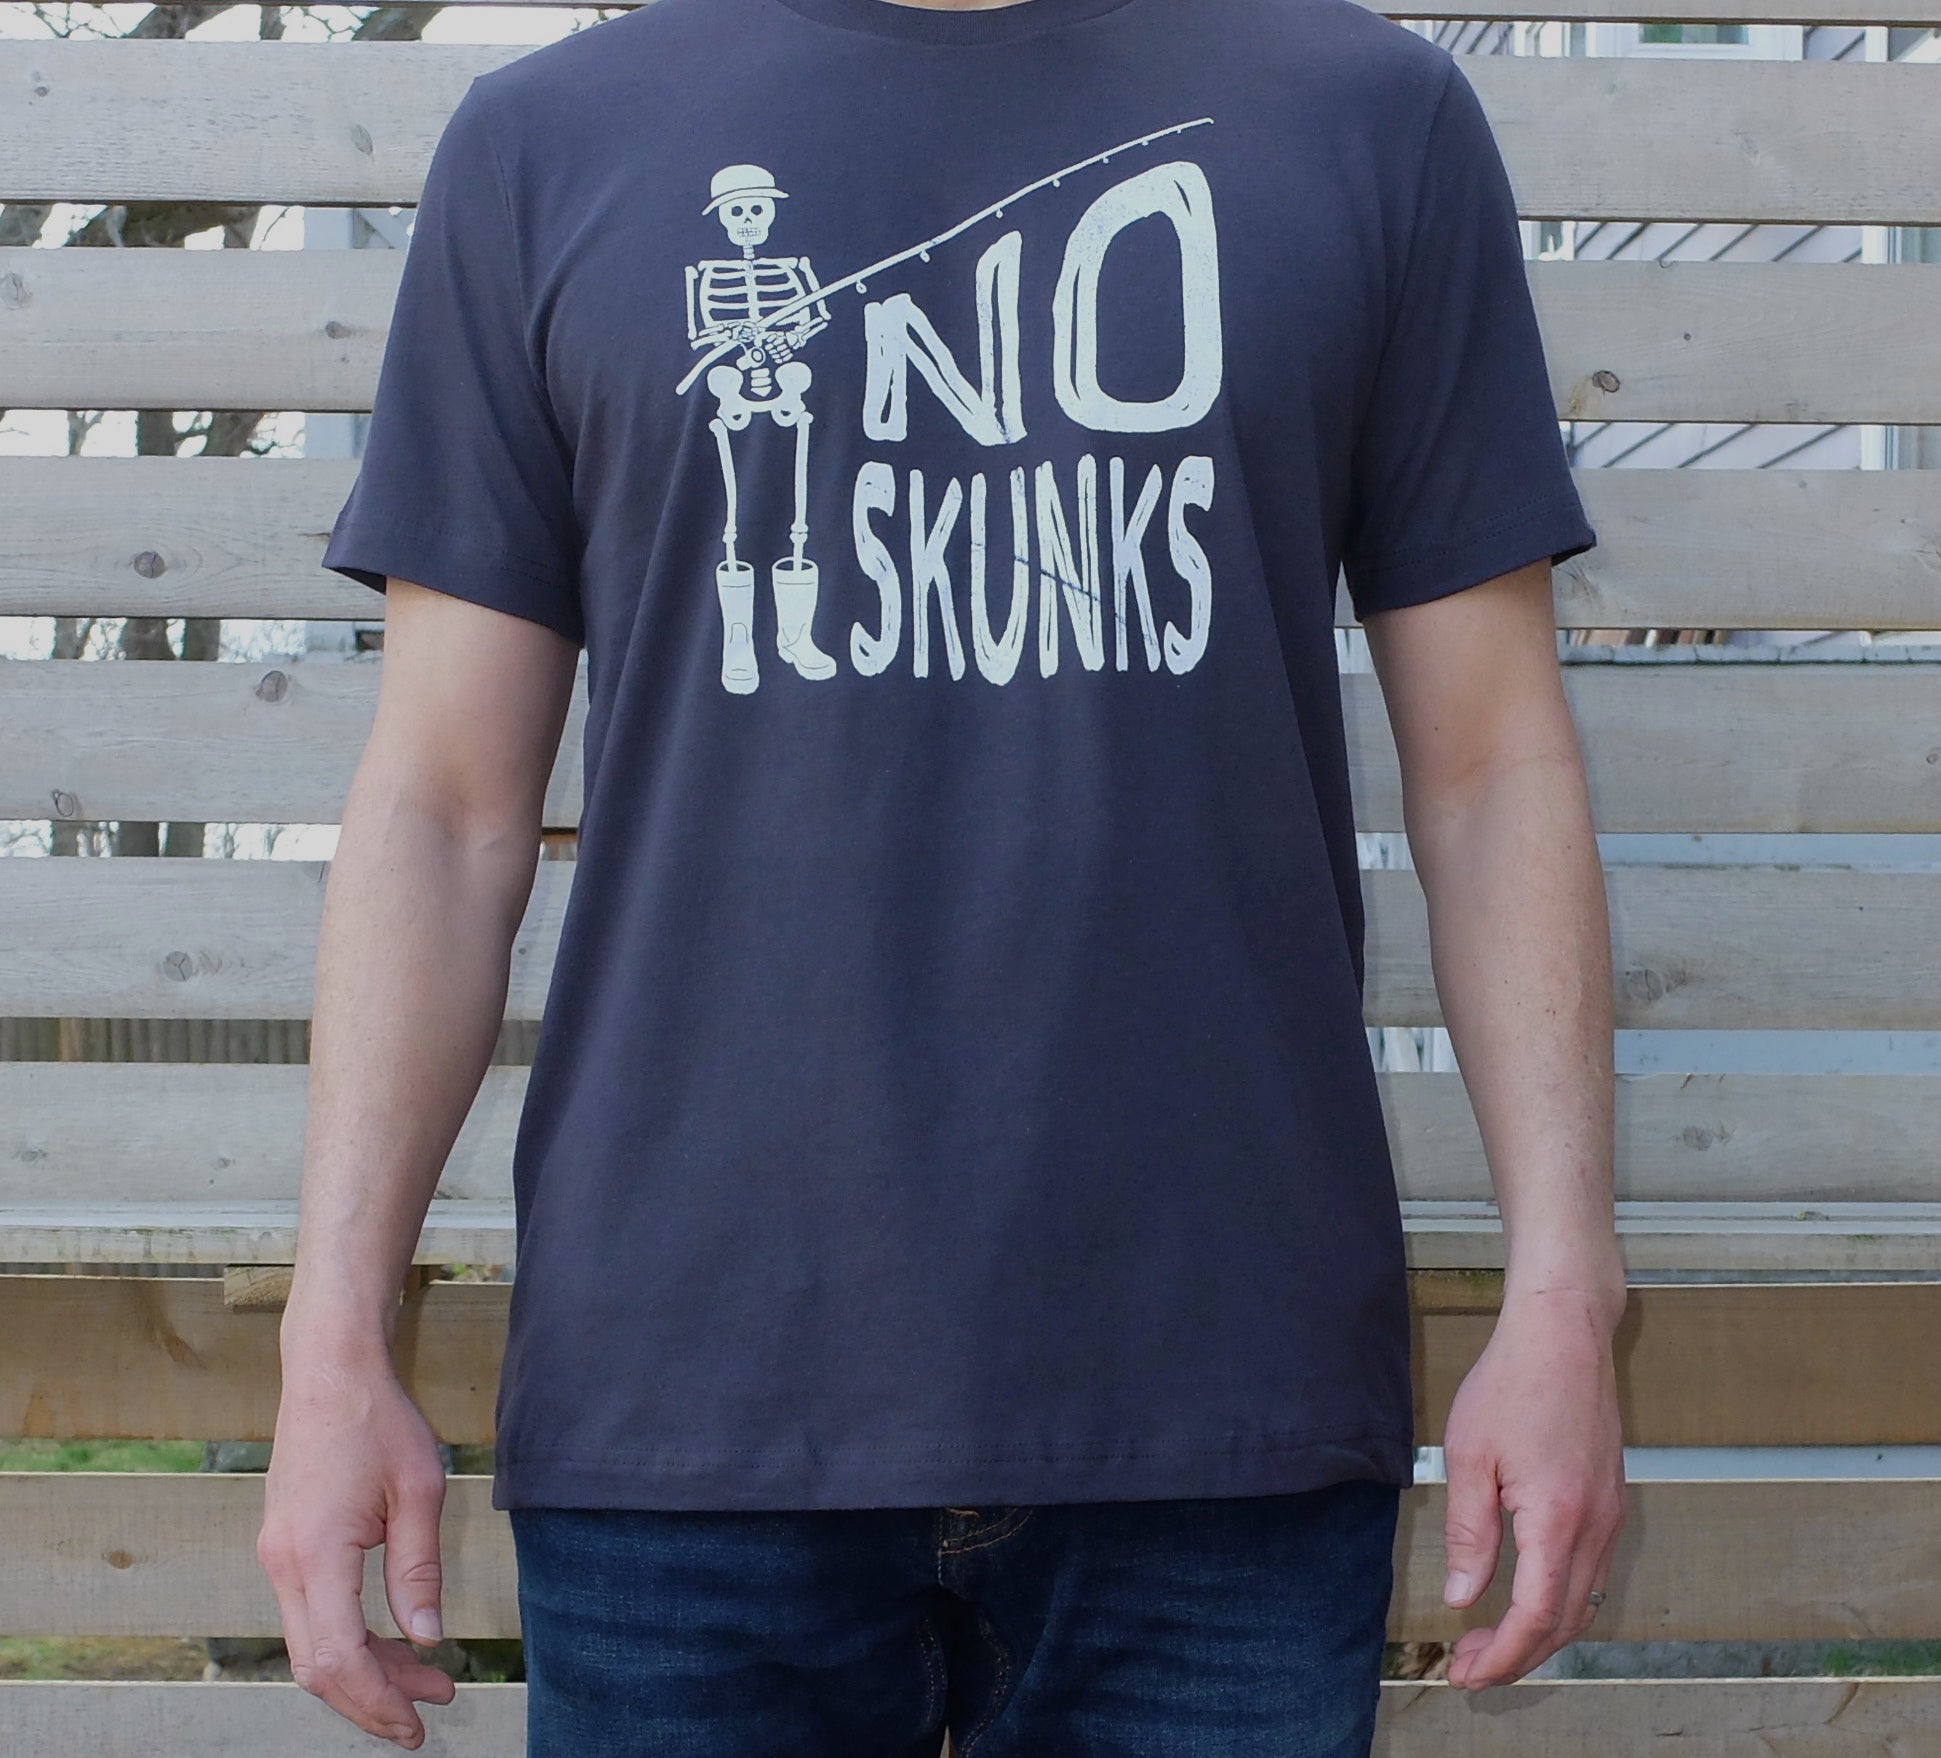 man wearing dark grey cotton t-shirt with white skeleton fisherman graphic and No Skunks text